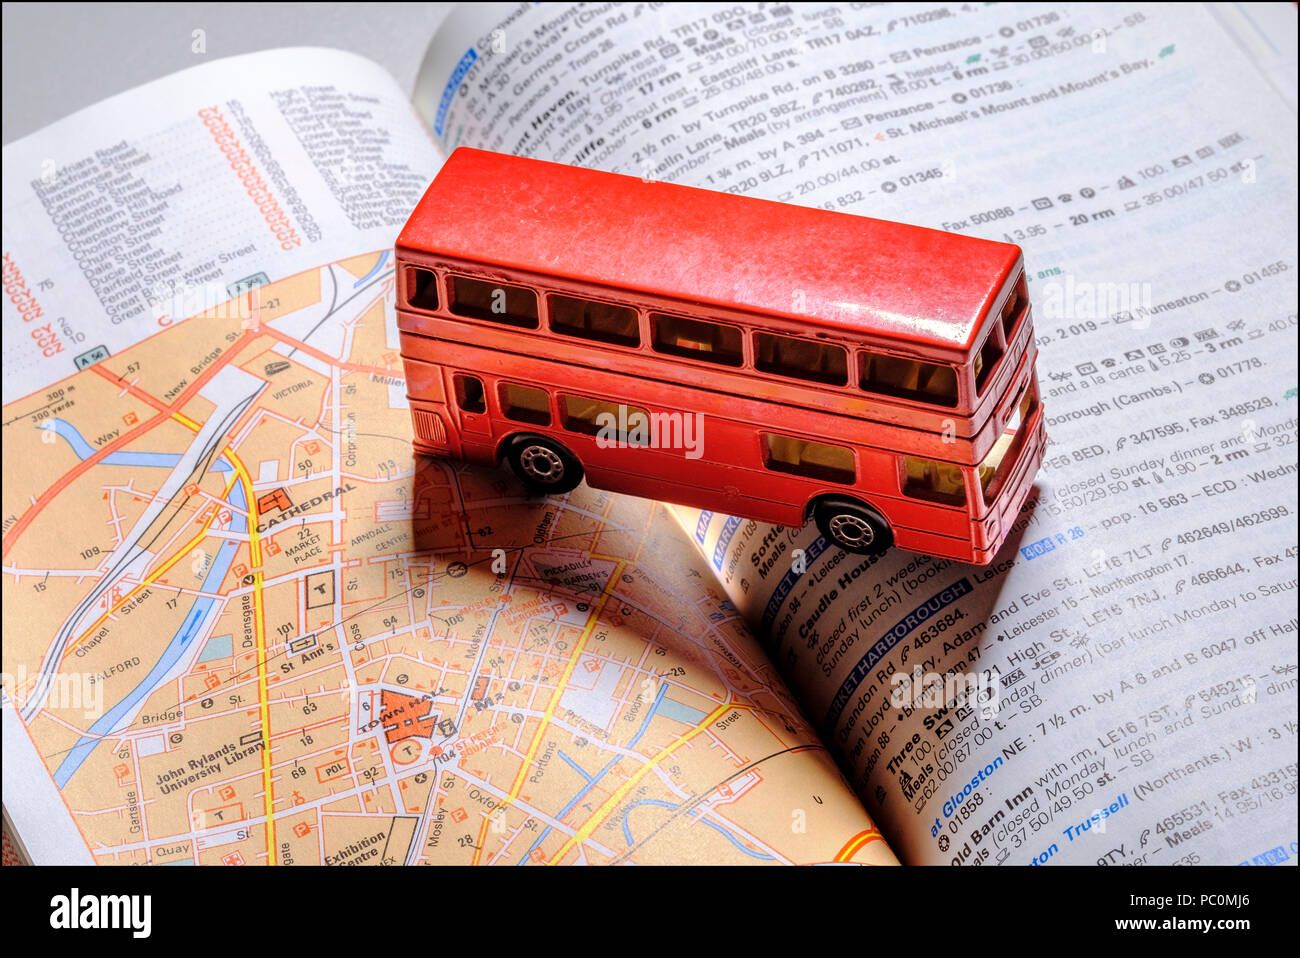 Miniature English red routemaster double decker bus on Michelin red guide, Stock Photo